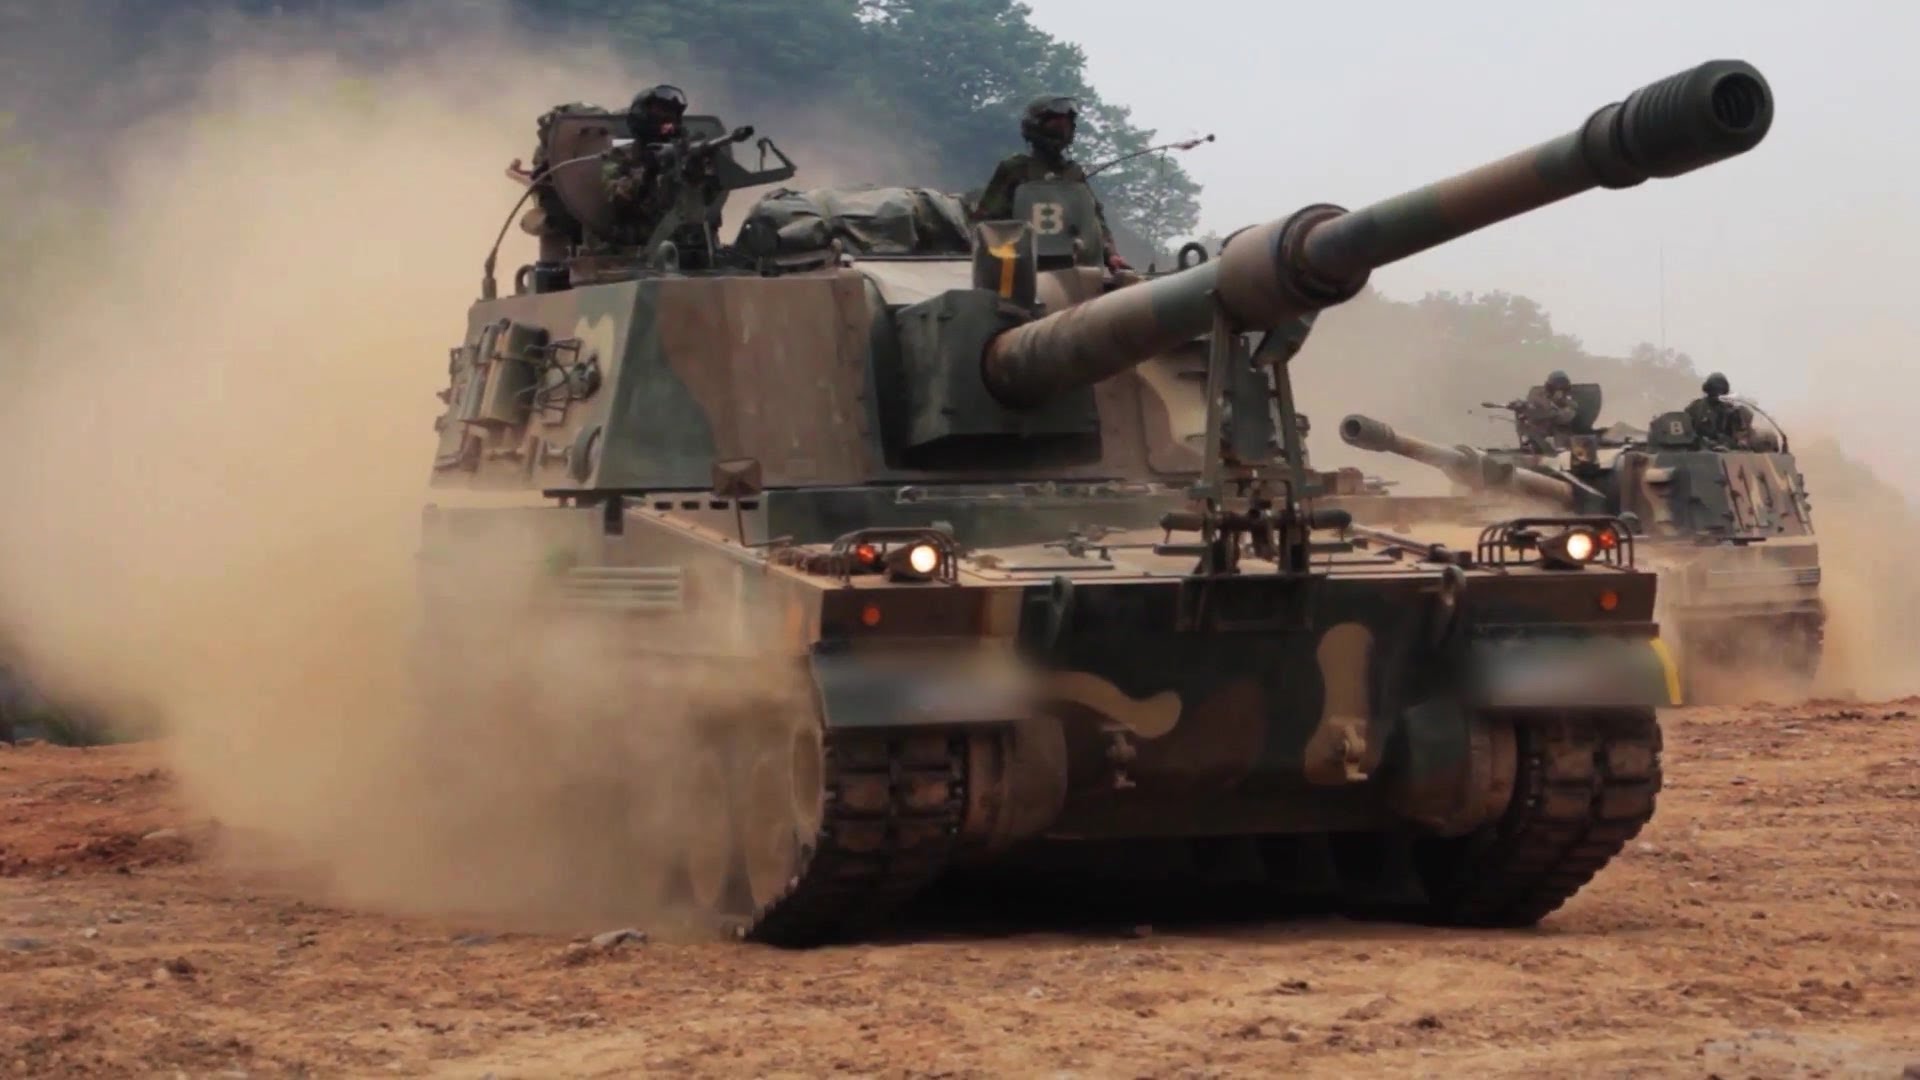 Major Boost to Indian Army’s Strike Corps Following Cabinet’s Clearance for Acquiring 100 ‘K-9 Vajra’ Self Propelled Tracked Howitzers.